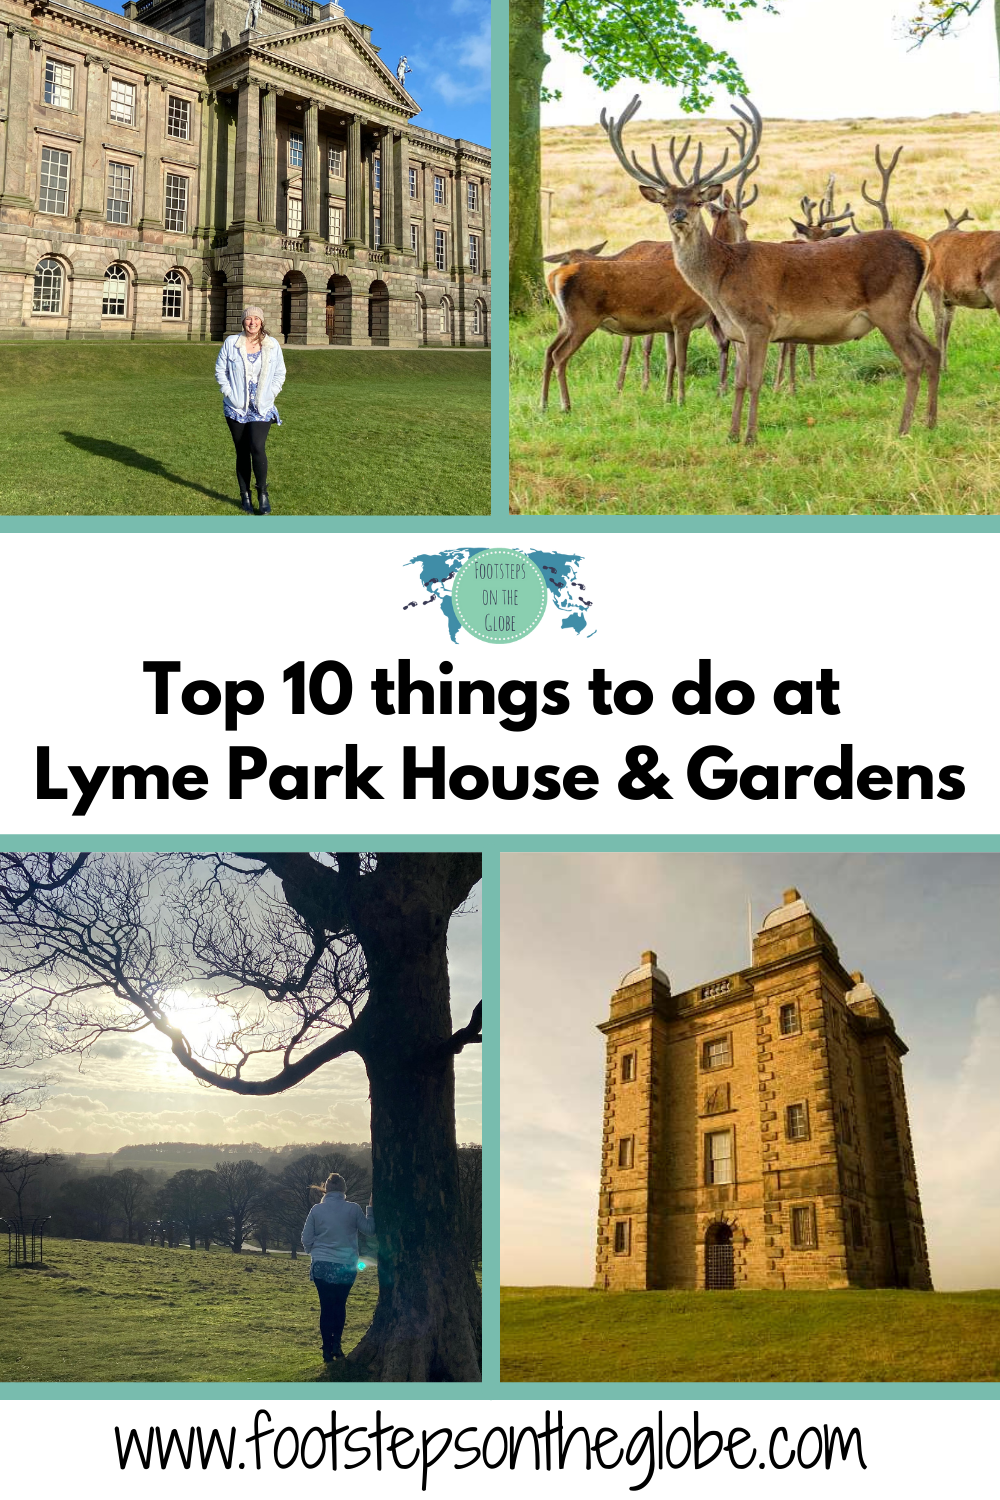 Top 10 things to do at Lyme Park House and Gardens Pinterest image